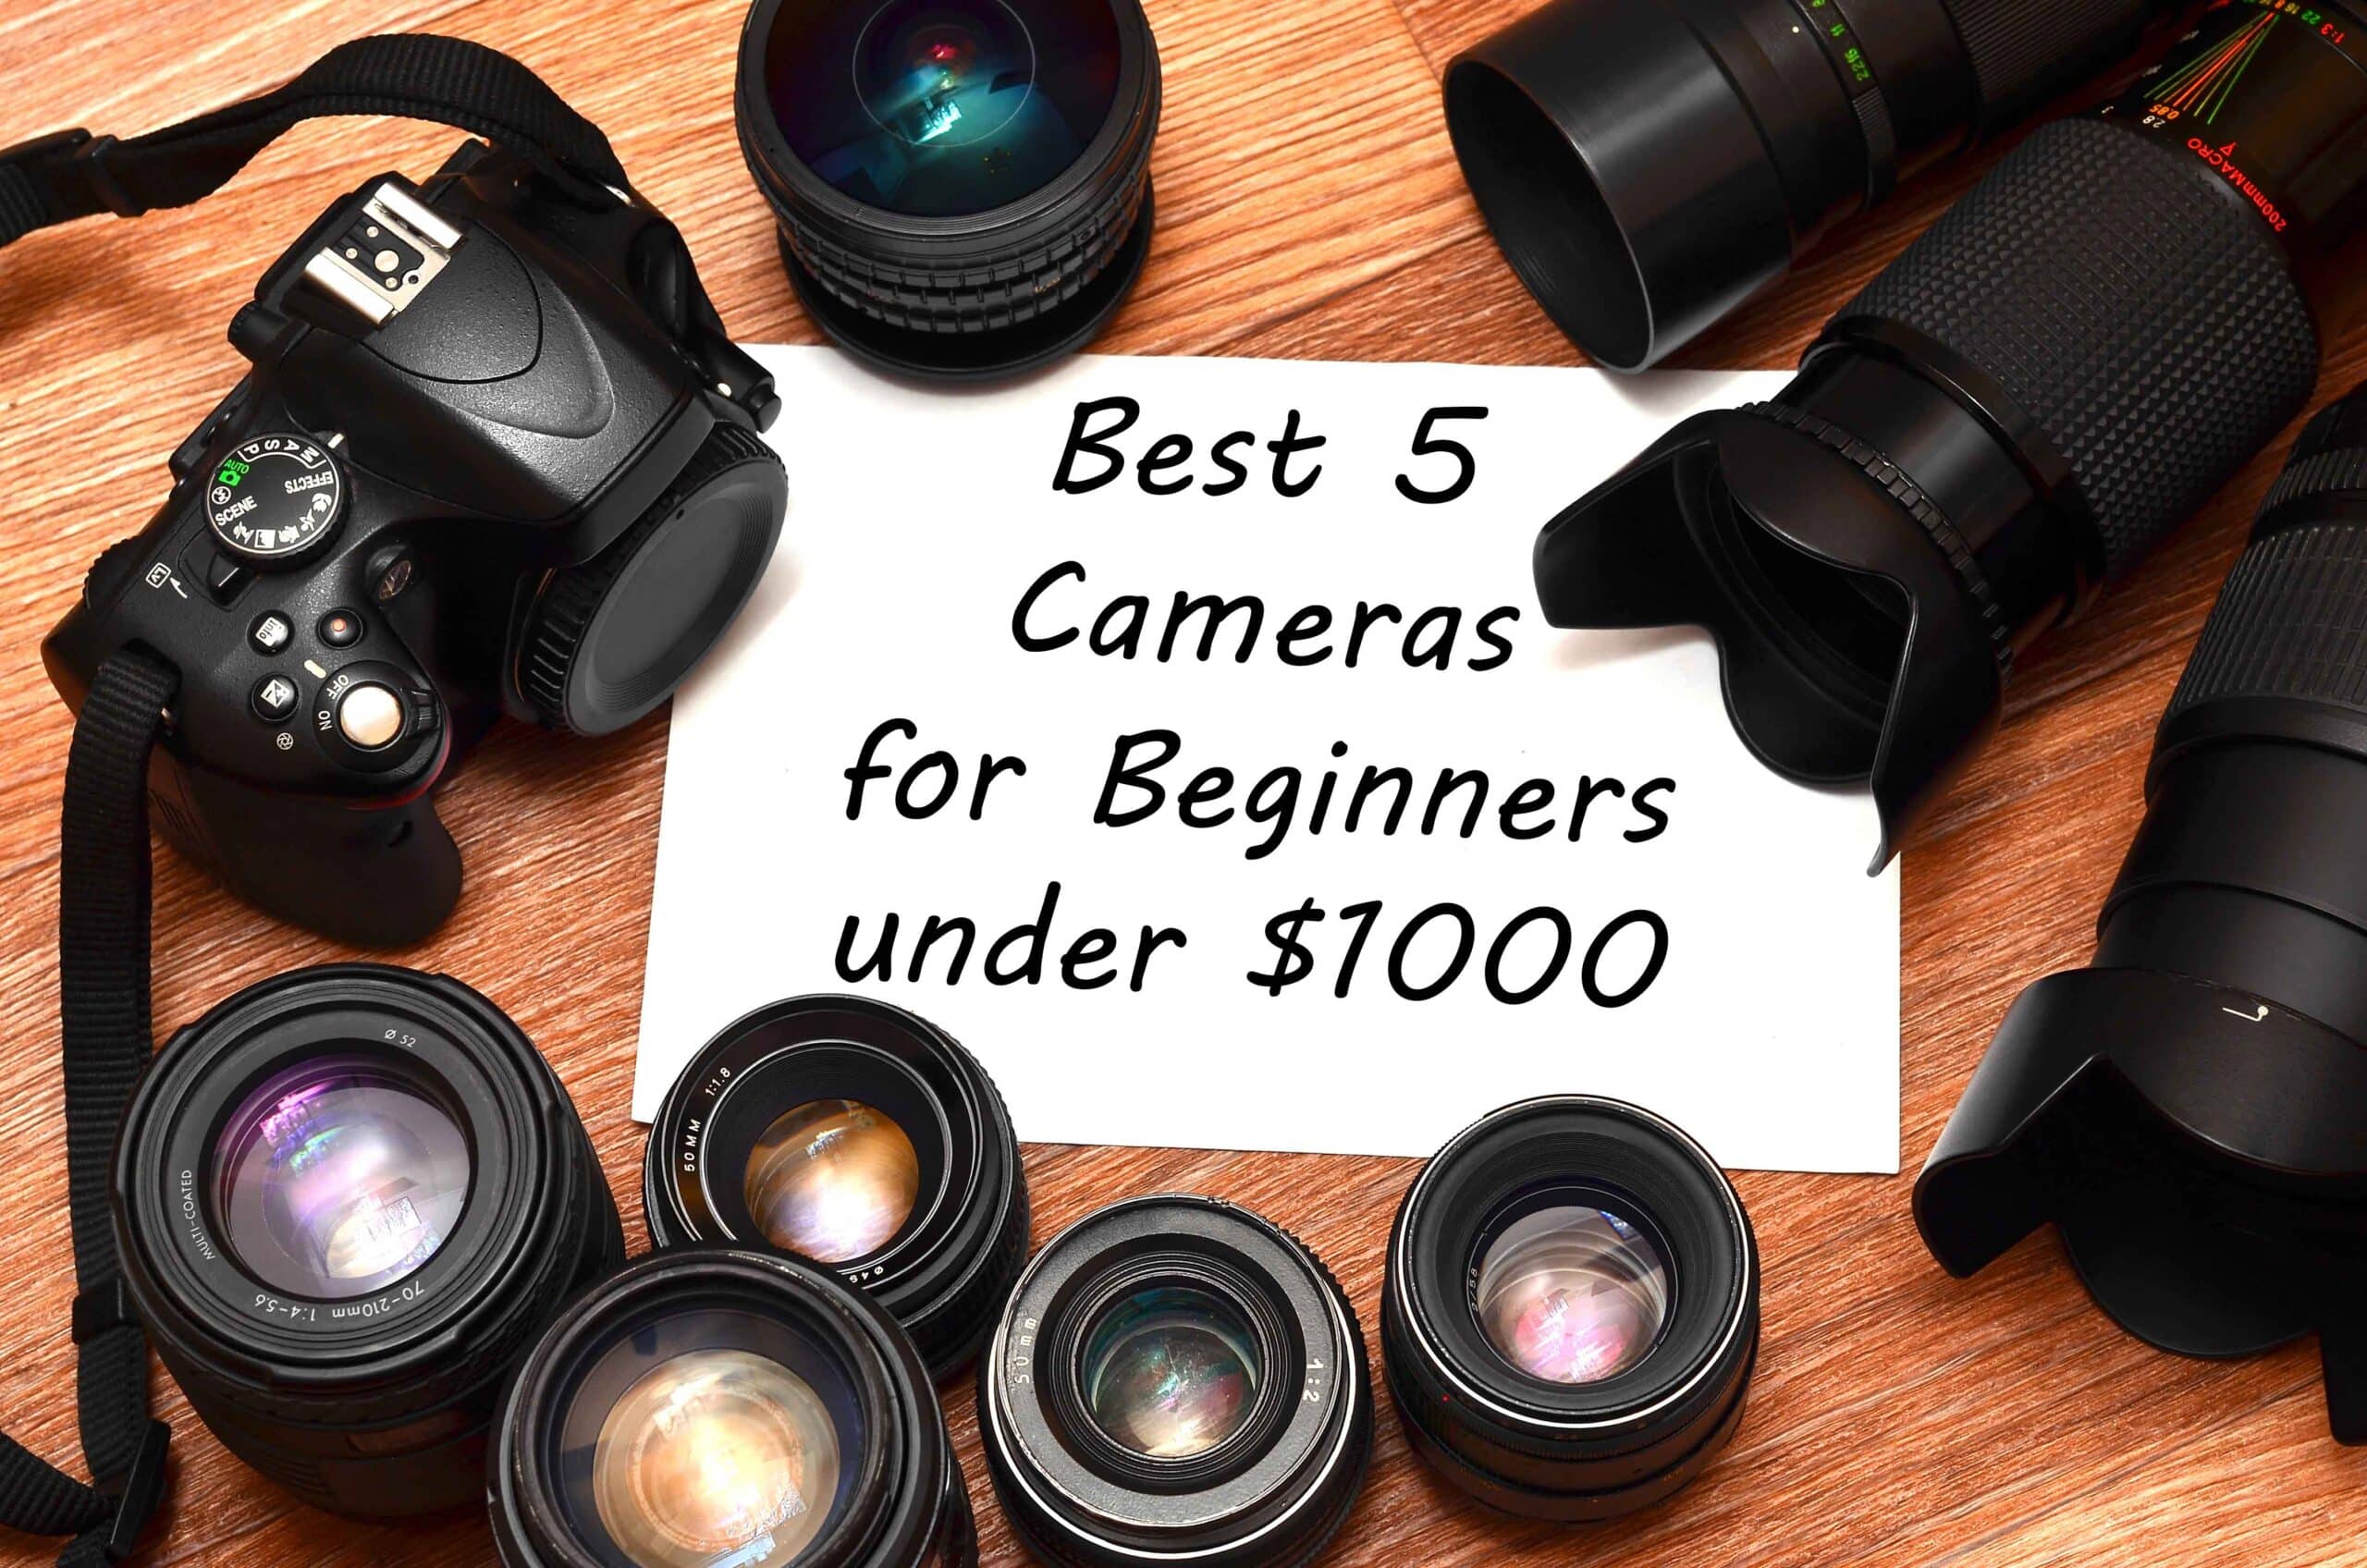 Top 5 Cameras for Beginners